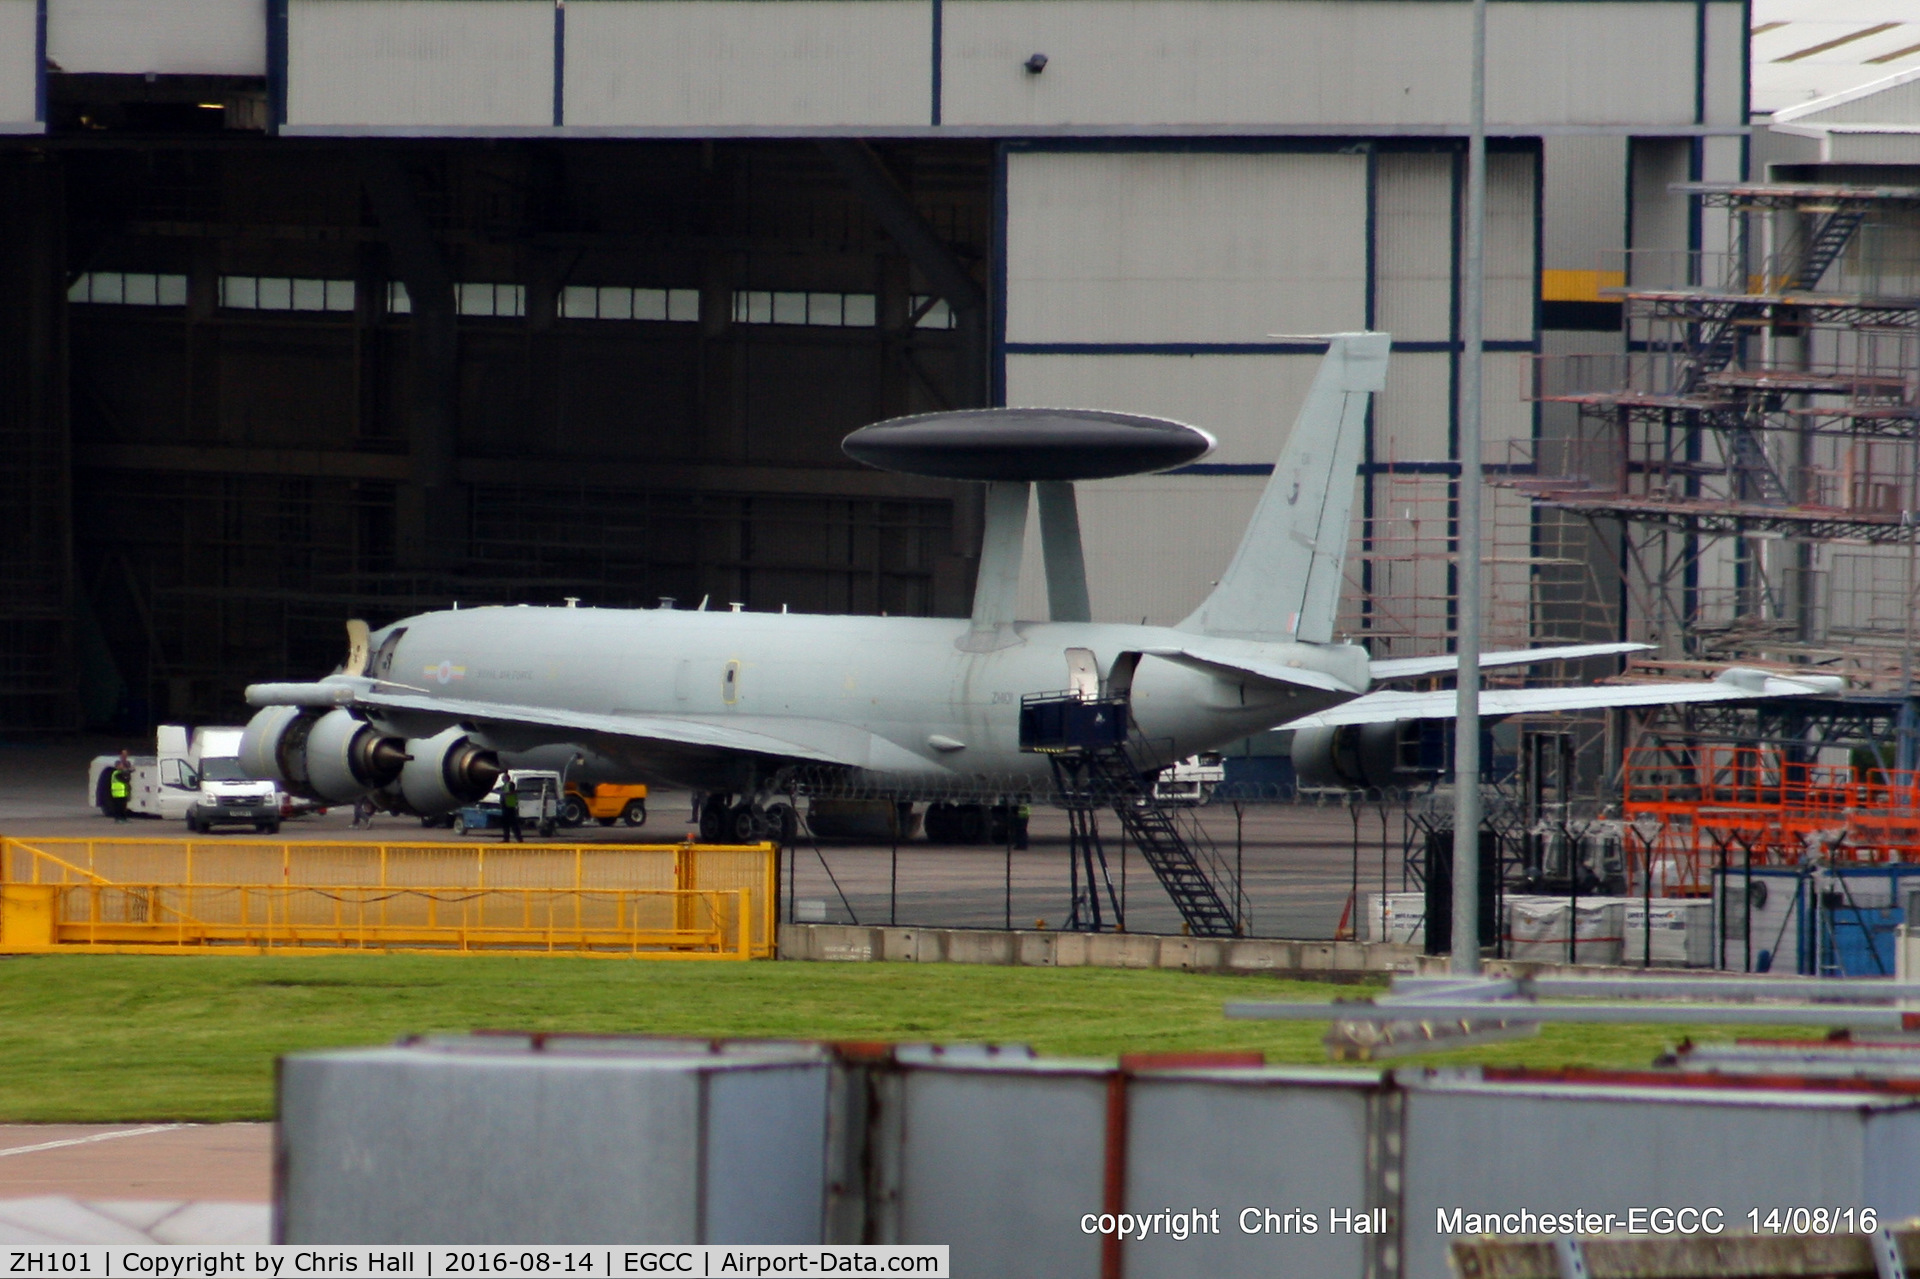 ZH101, 1989 Boeing E-3D Sentry AEW.1 C/N 24109, going into Air Livery for some paintwork